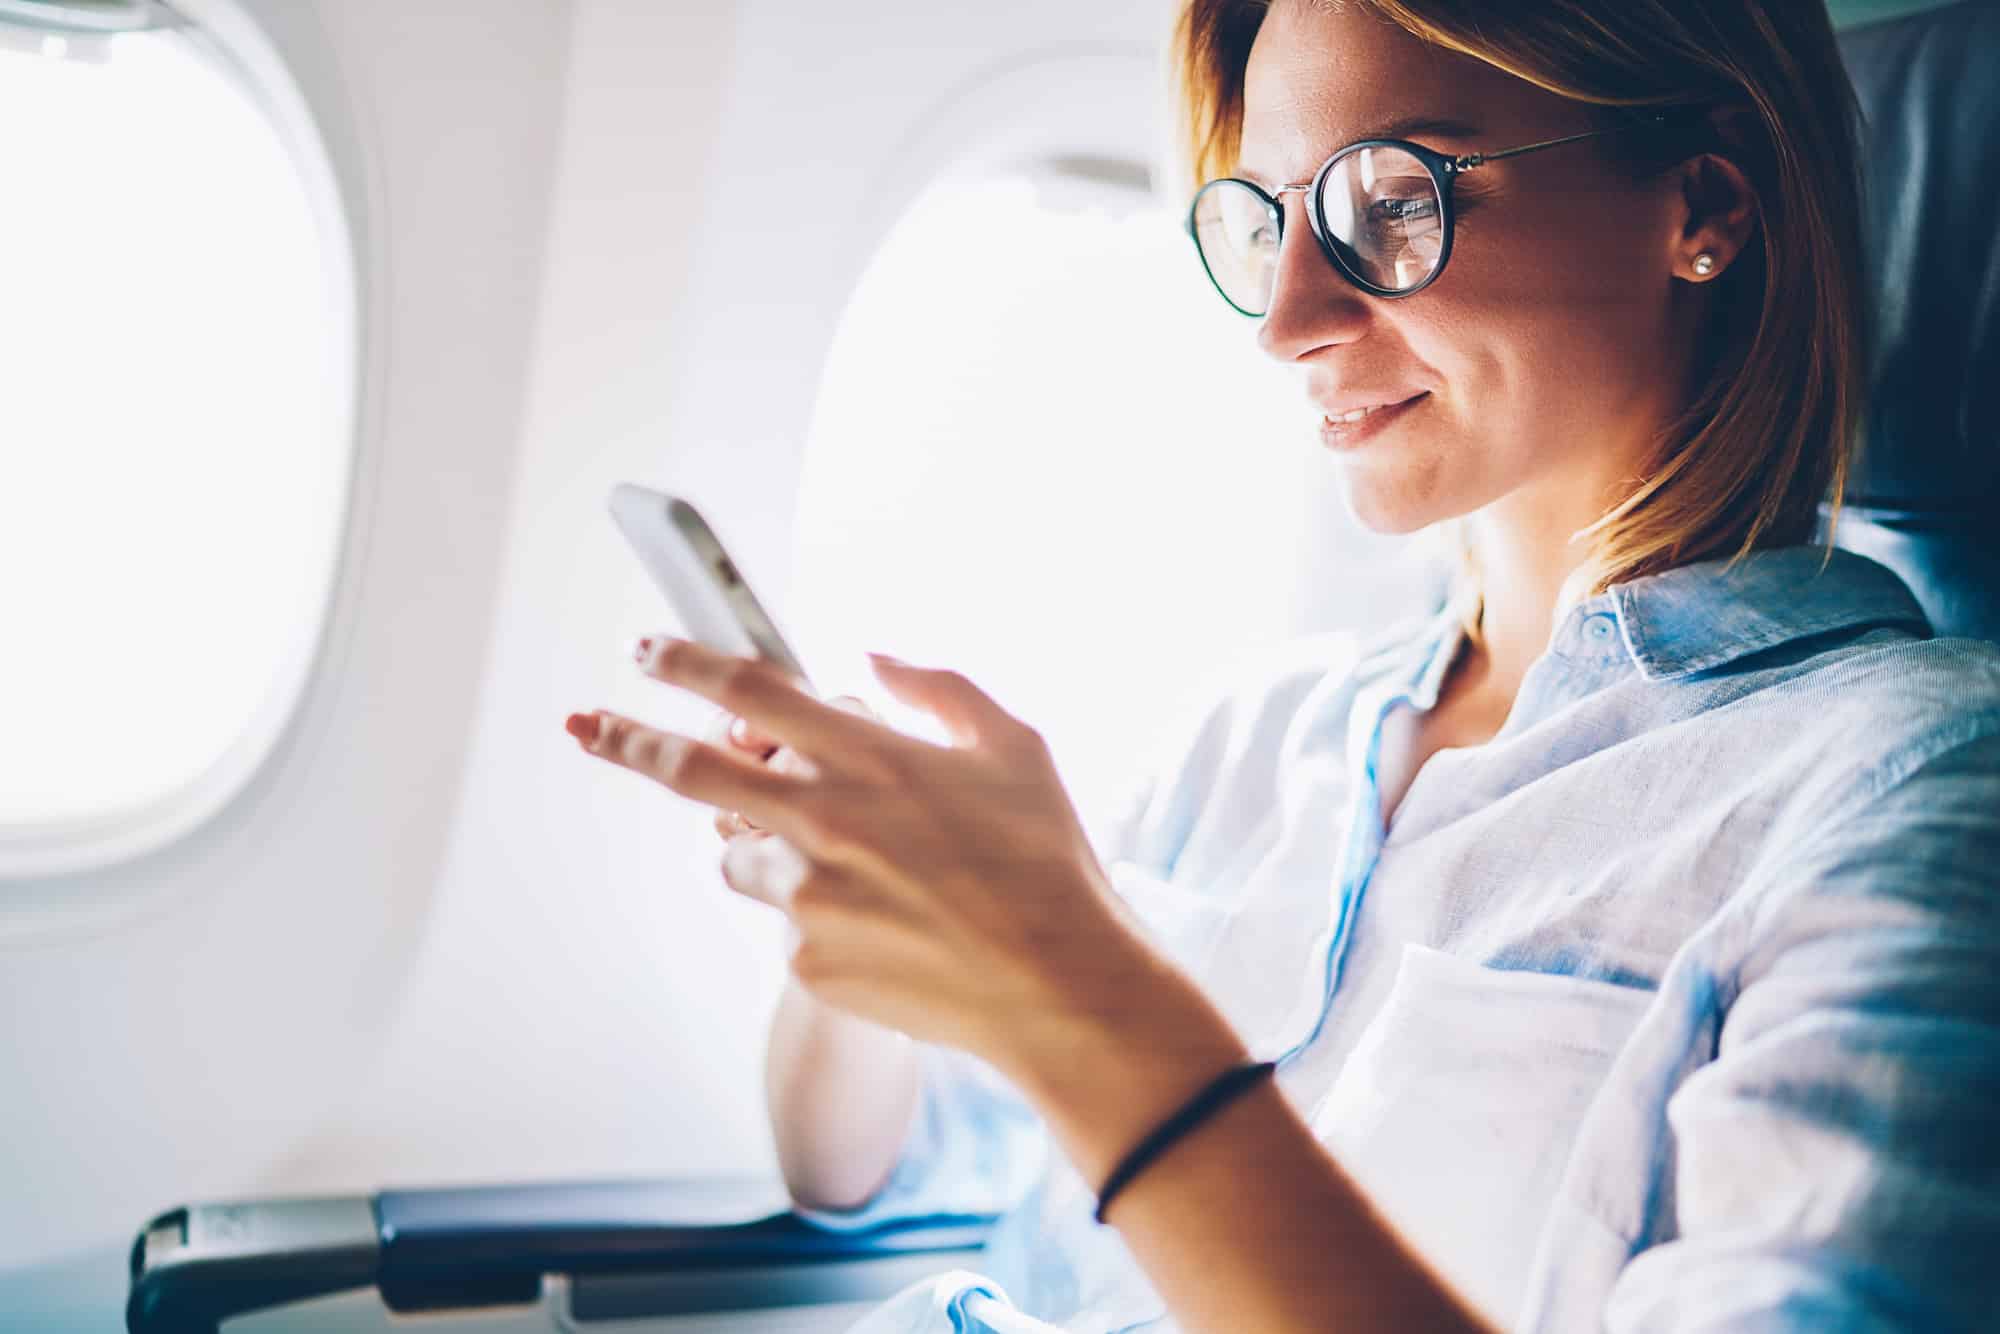 Woman on airplane looking at cell phone